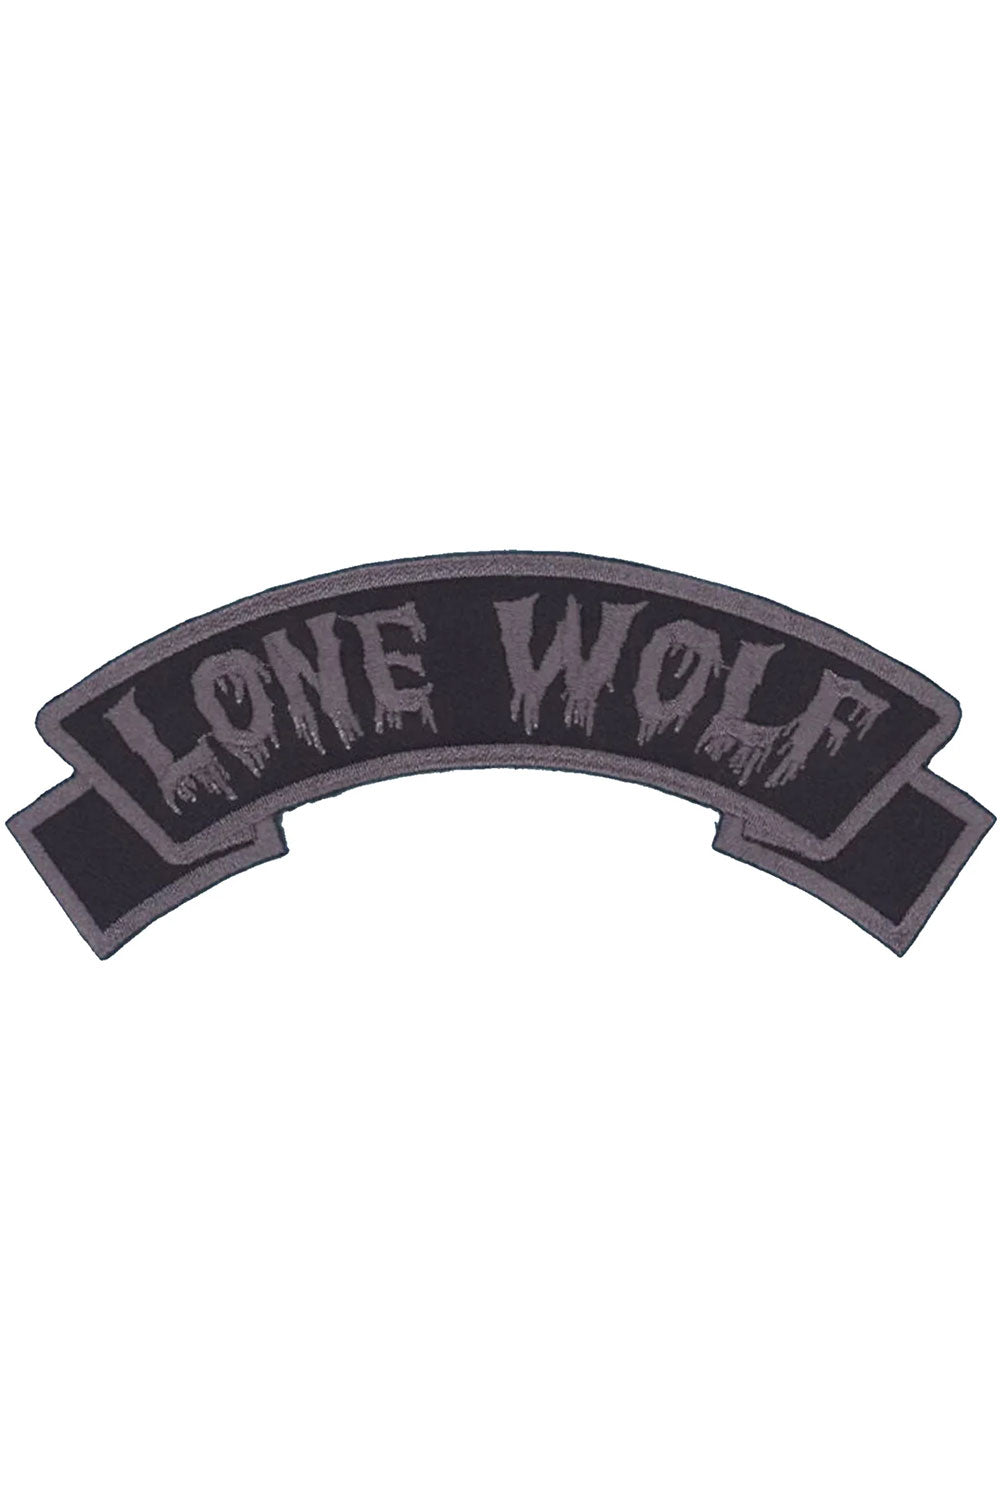 Arch Patch Lone Wolf